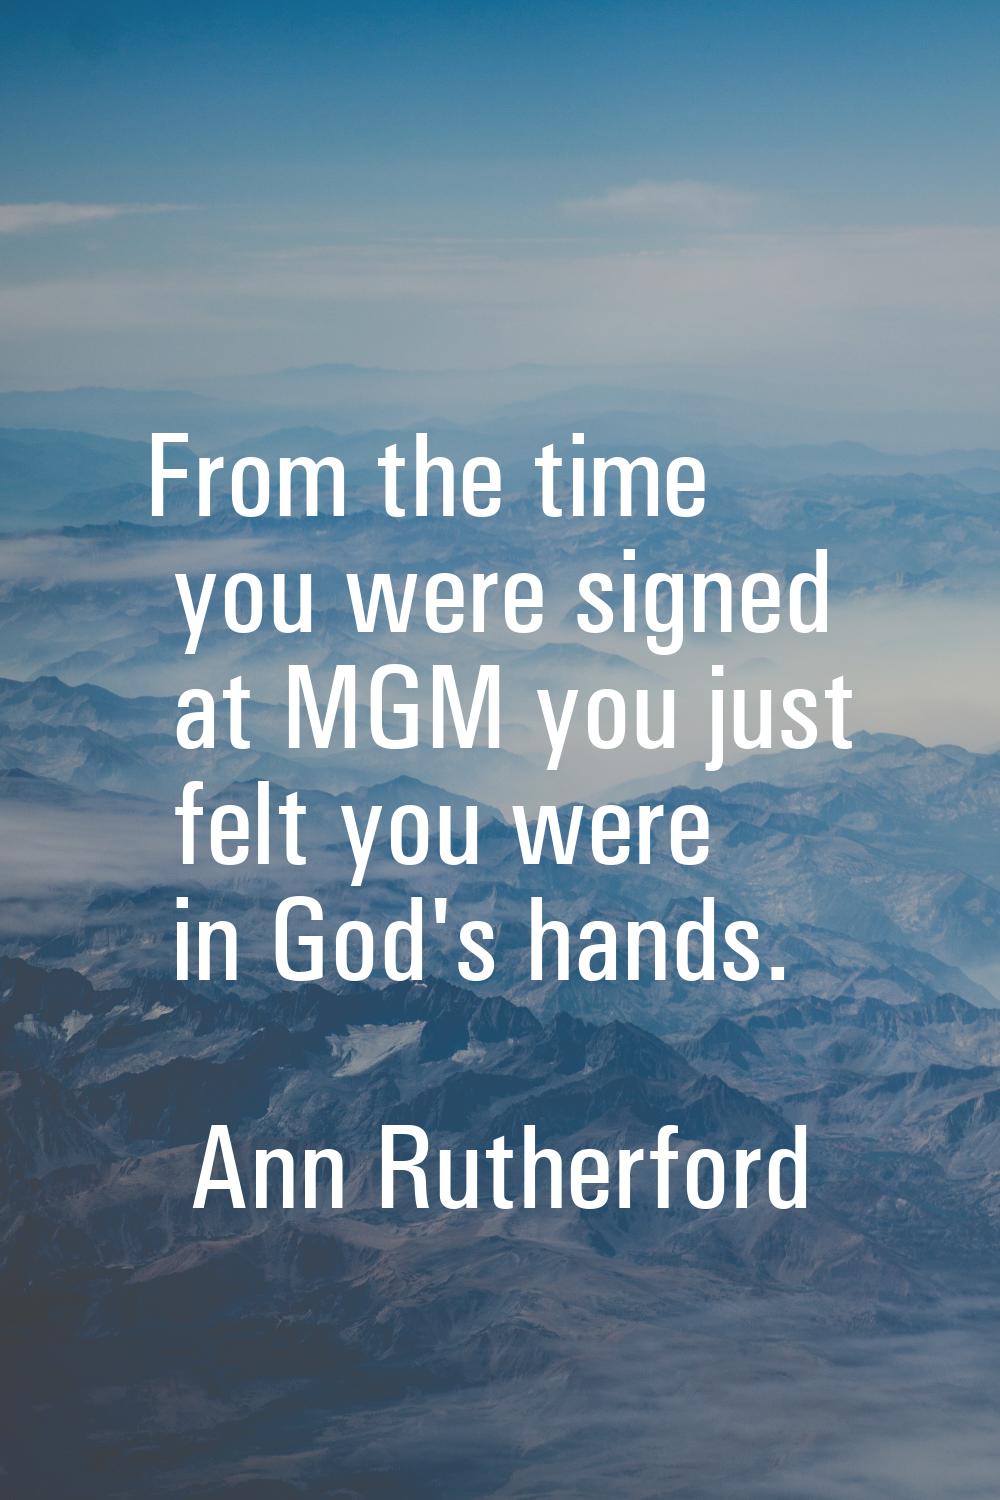 From the time you were signed at MGM you just felt you were in God's hands.